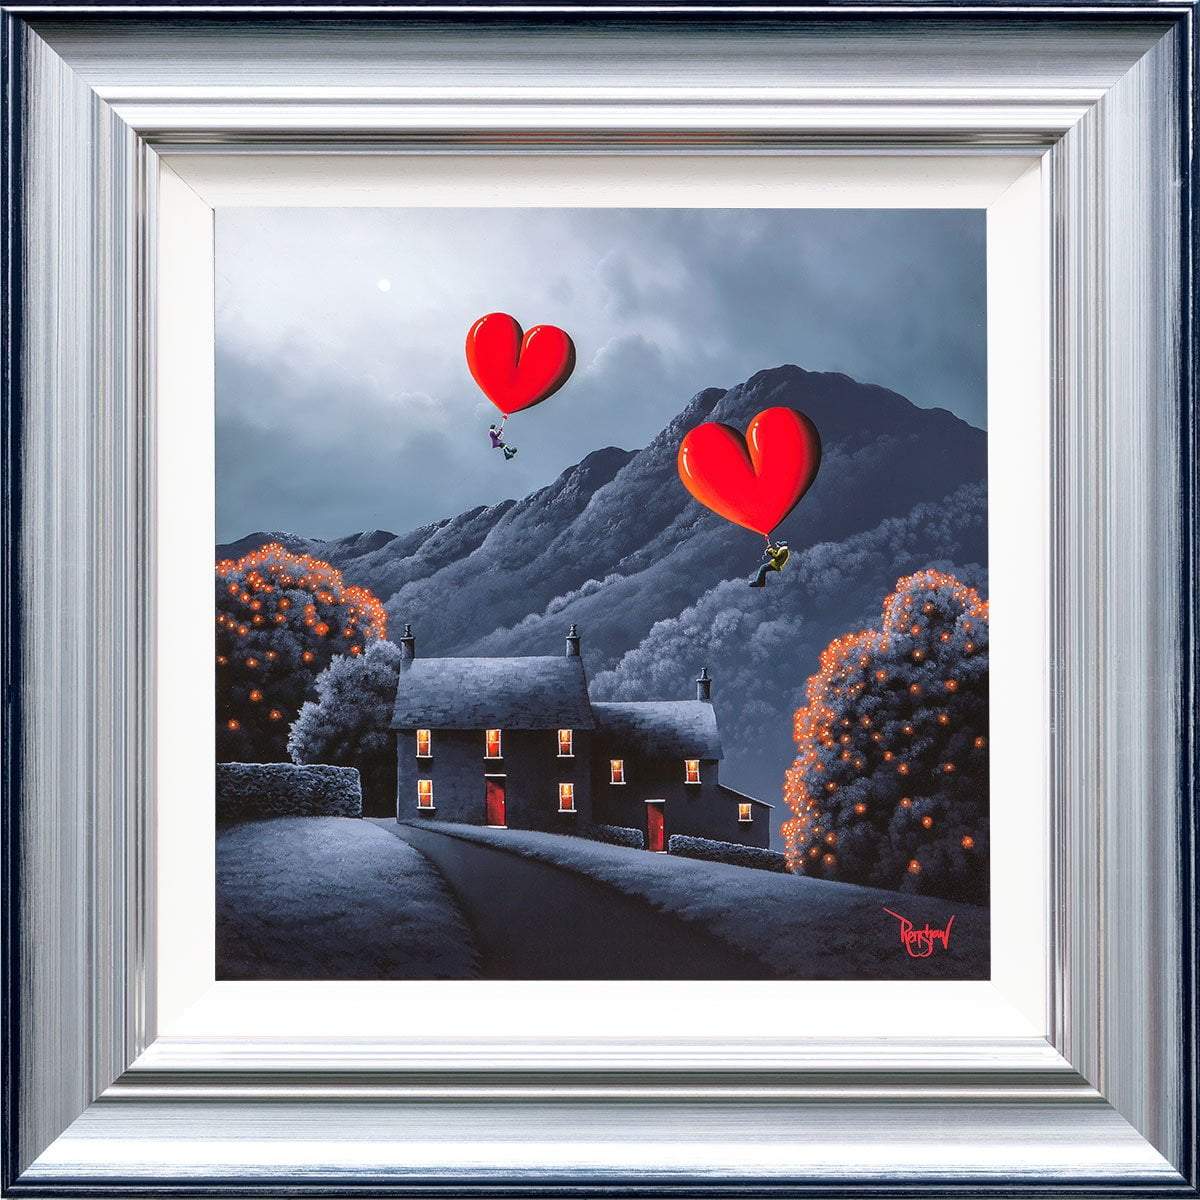 Finding Our Way Home - Edition David Renshaw